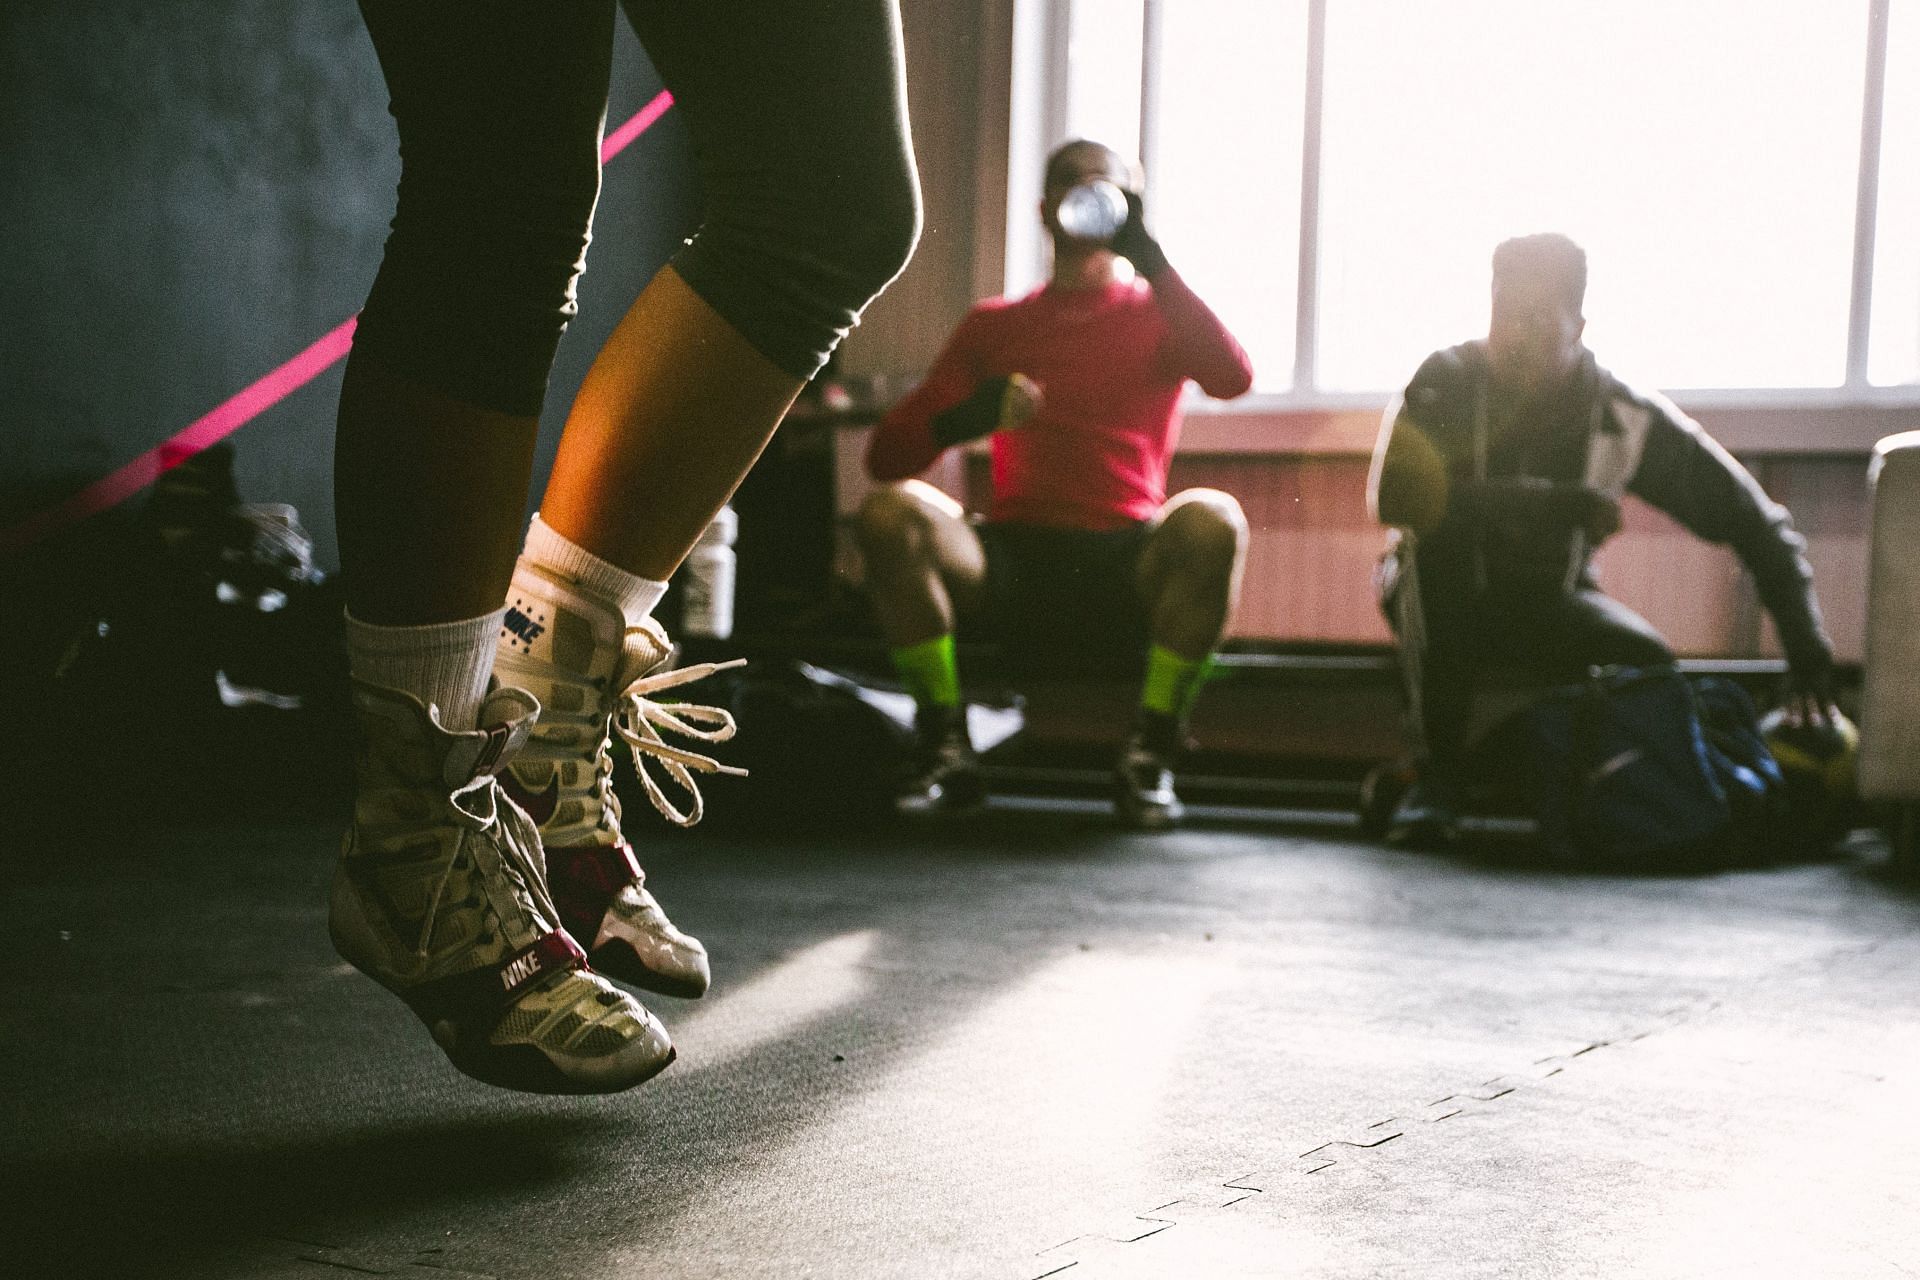 TKE Exercises helps in regaining lost mobility and quad strength. (Image via Unsplash / Dylan Nolte)